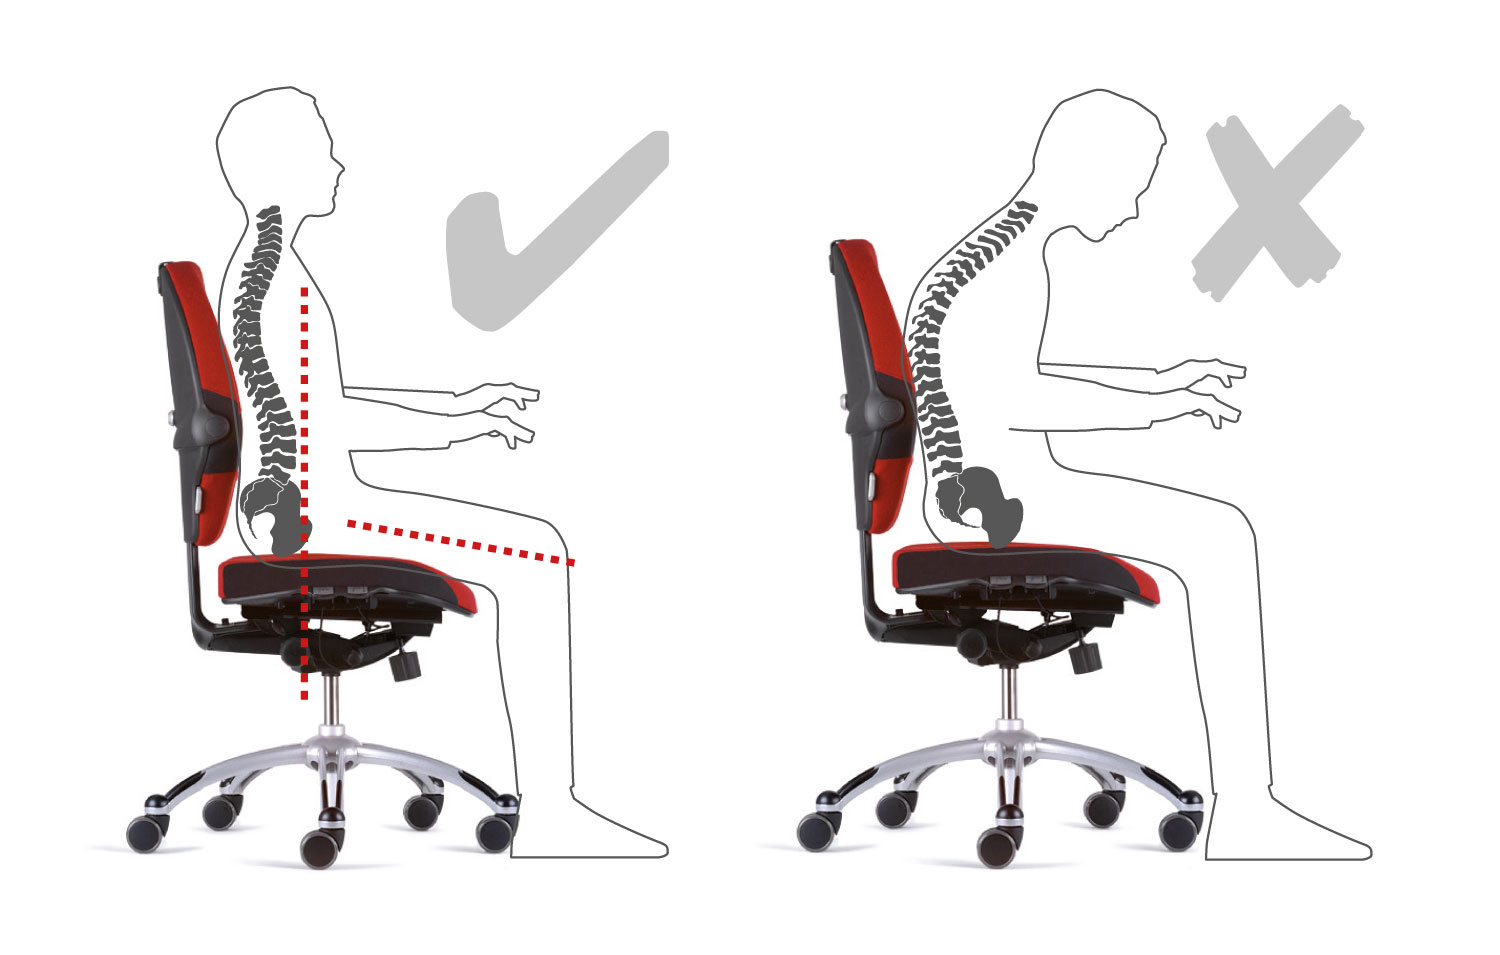 Check your posture and positioning